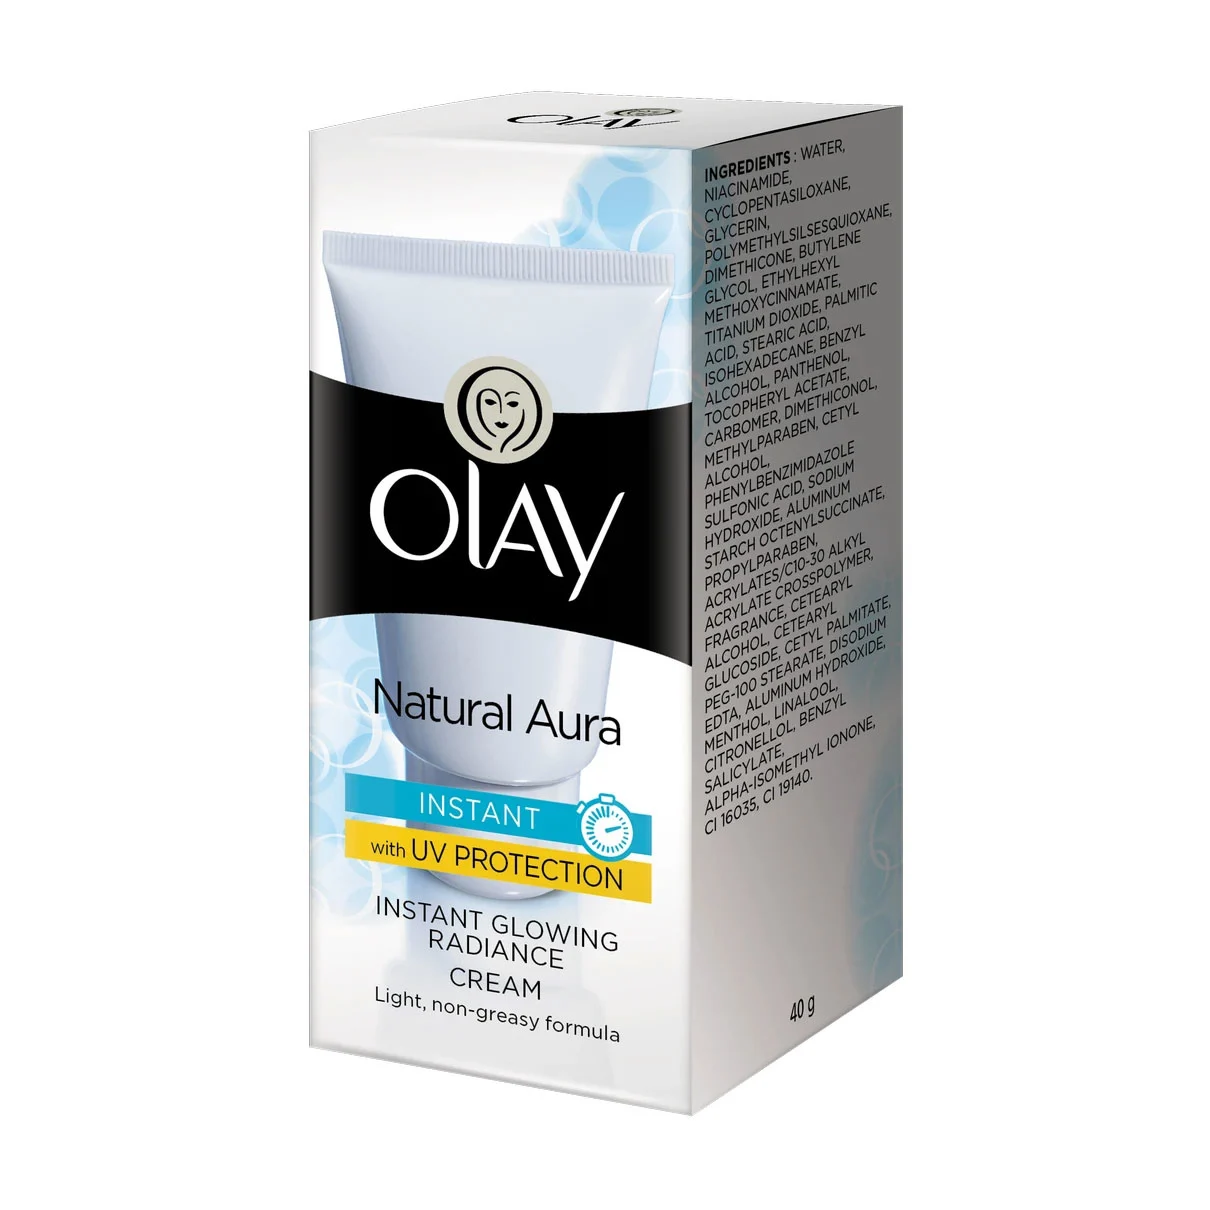 Olay Natural Aura 7 IN ONE Instant Glowing Radiance with UV Protection